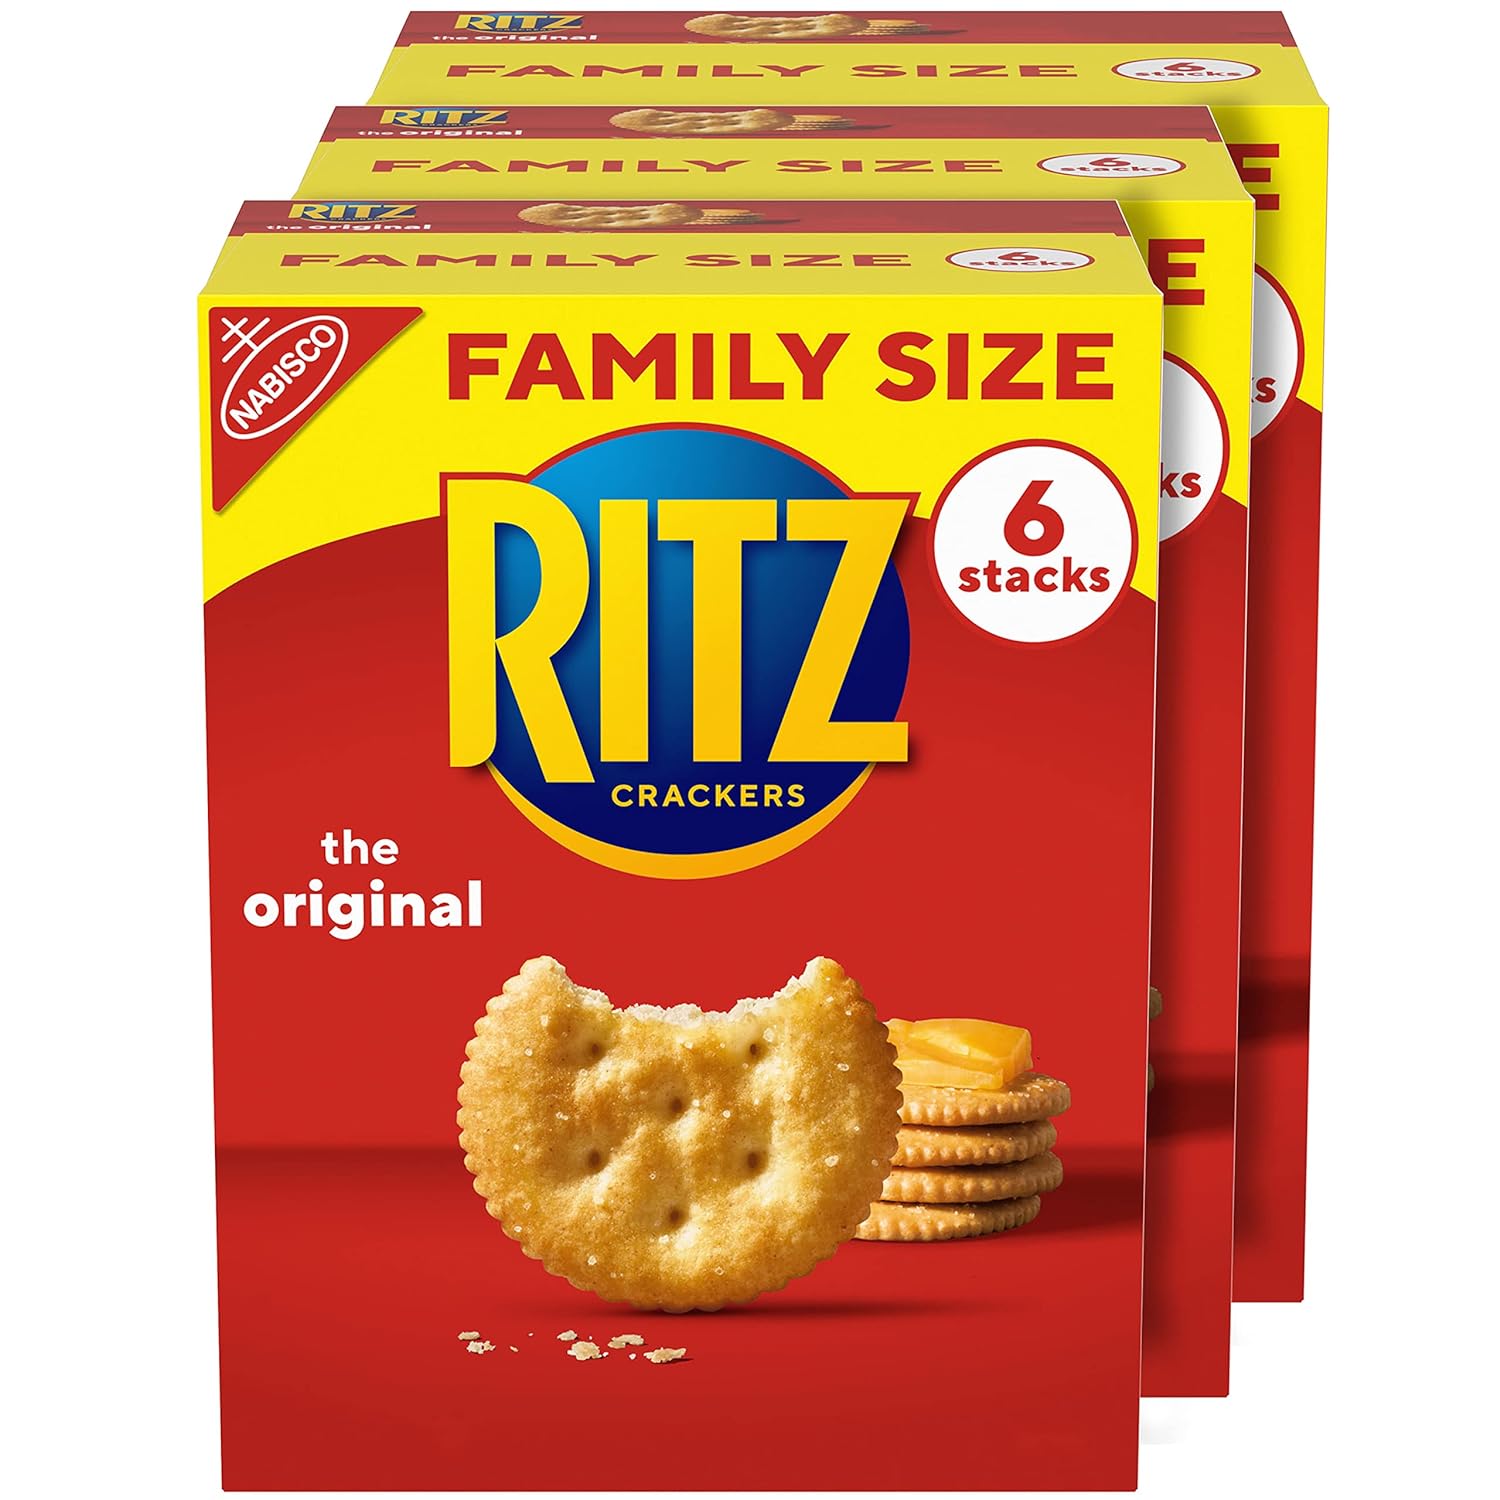 3-Pack Ritz Original Crackers (Family Size Boxes) $10.95 ($3.65 each) w/ S&S + Free Shipping w/ Prime or on orders over $35